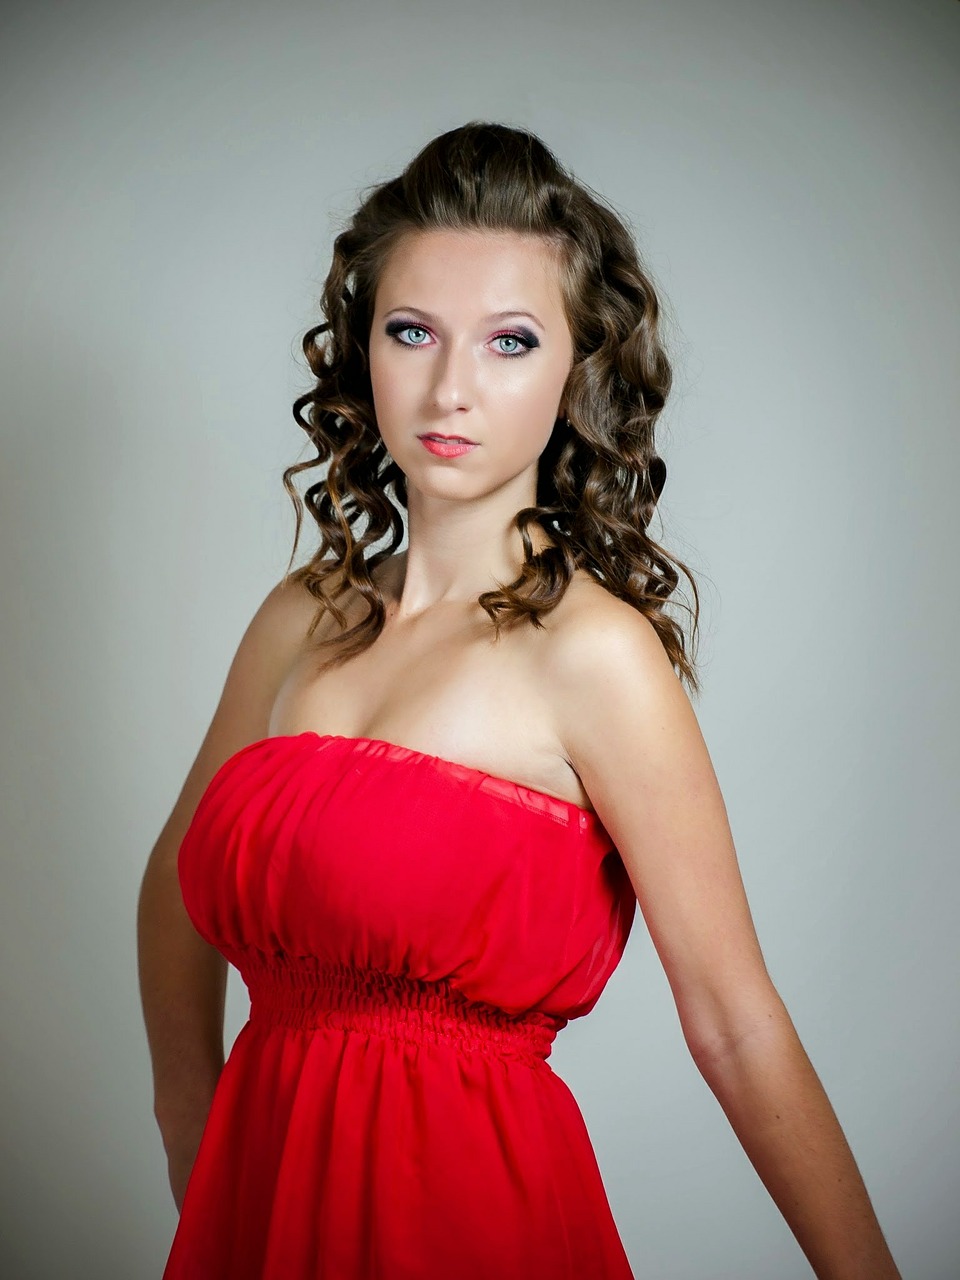 girl woman in red dress free photo